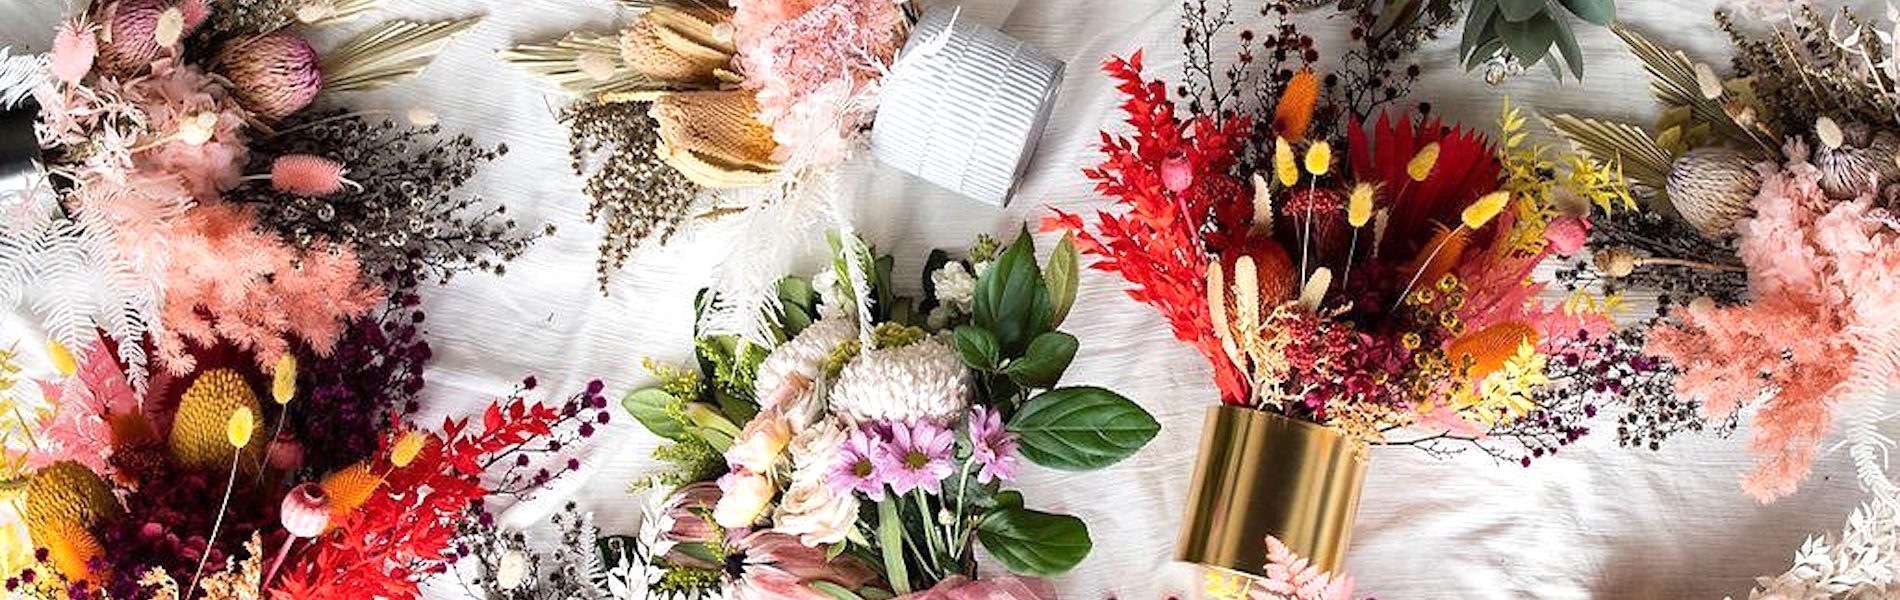 Boutique Florists In Perth That Offer Home Delivery Scoop